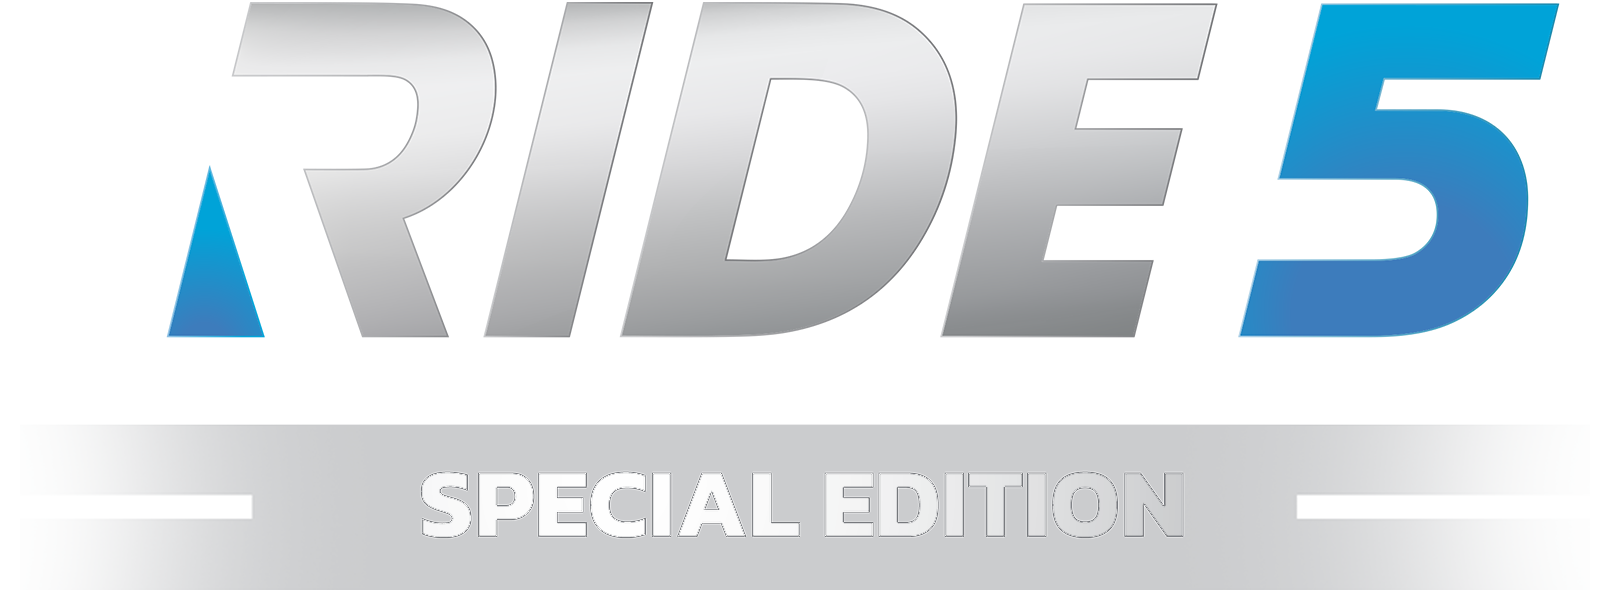 Buy RIDE 5 Credits Multiplier PS5 Compare Prices